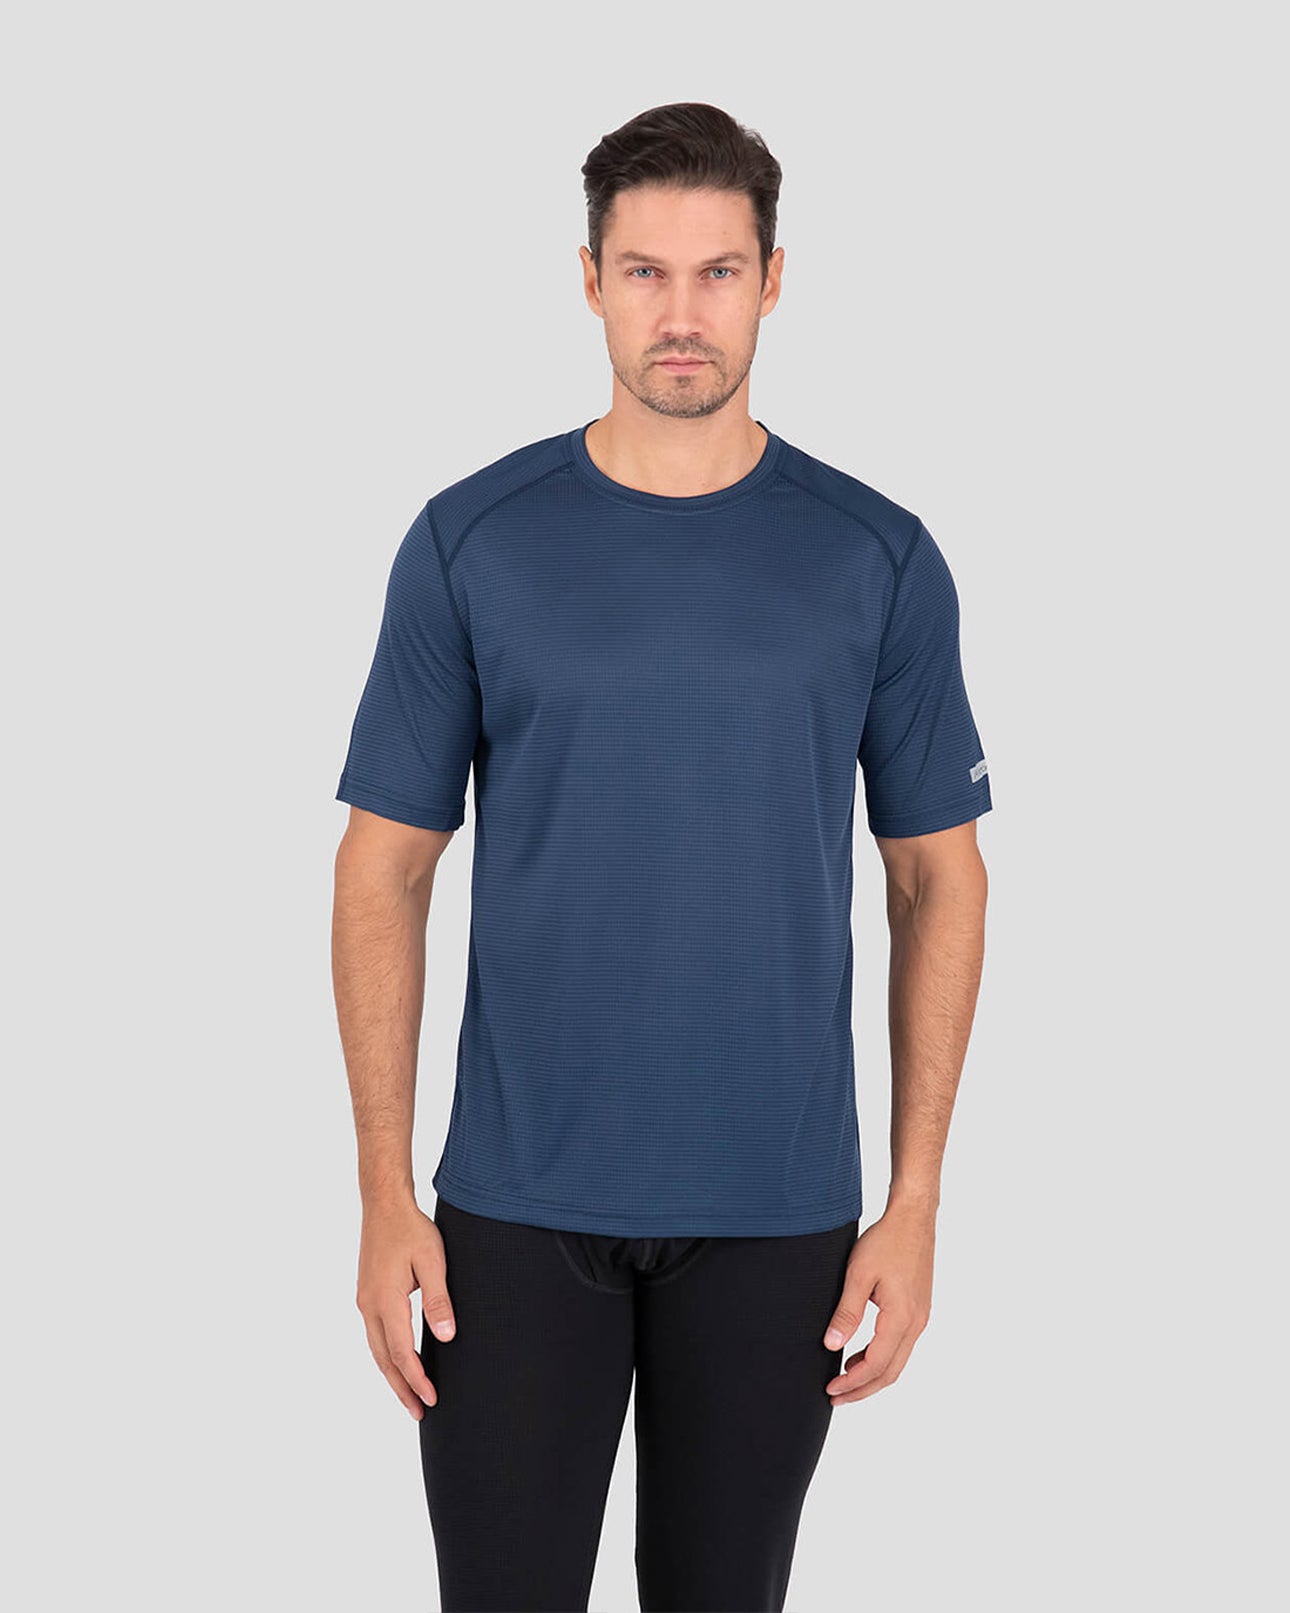 Men's Transport® Lightweight Recycled Polyester Thermal Short-Sleeve Shirt | Color: Twilight